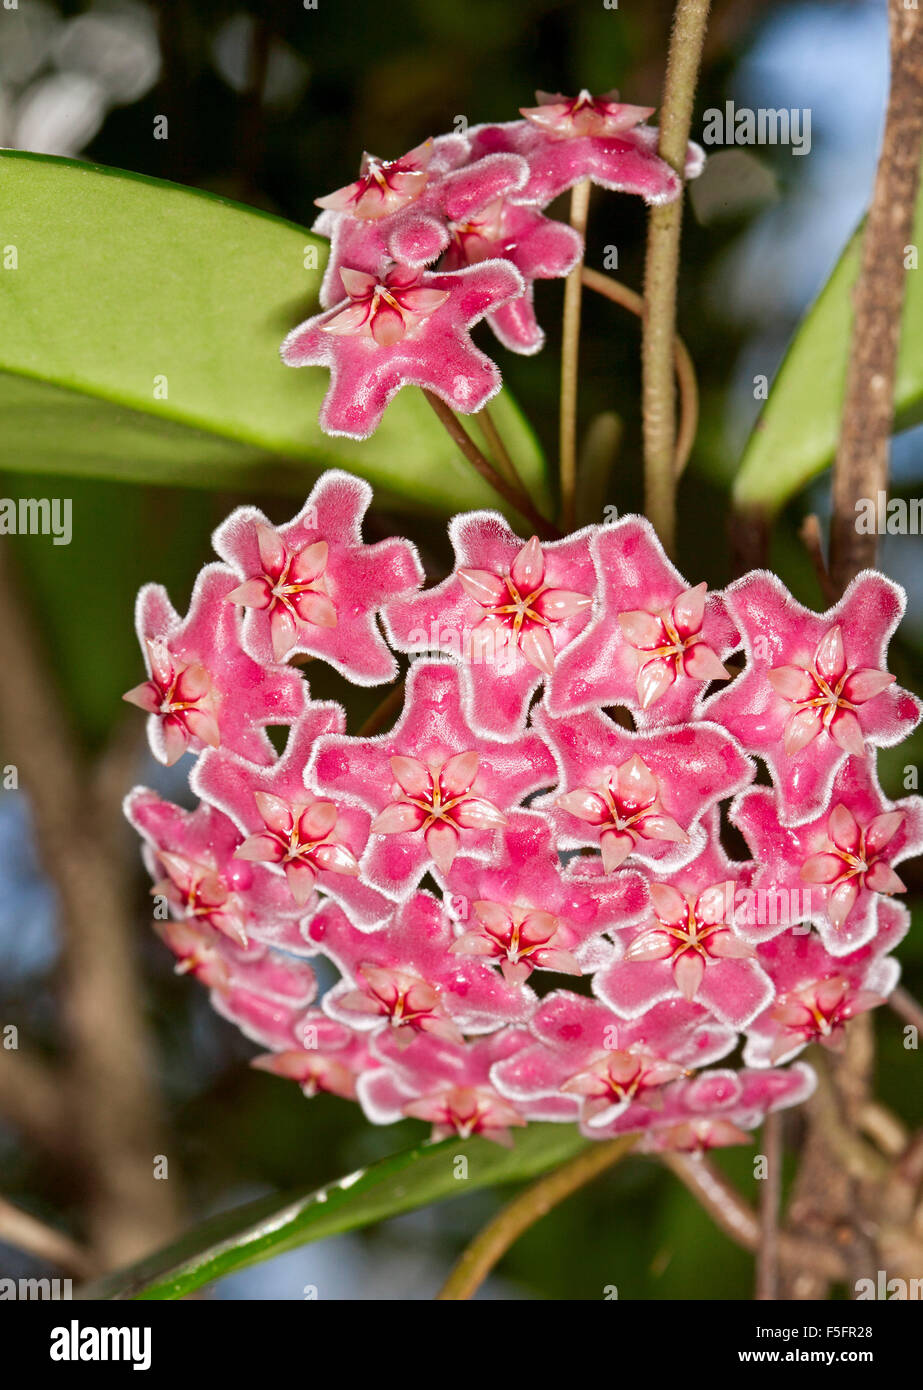 Large cluster of spectacular deep pink / red perfumed flowers edged with white of Hoya 'Royal Hawaiian', climbing plant Stock Photo